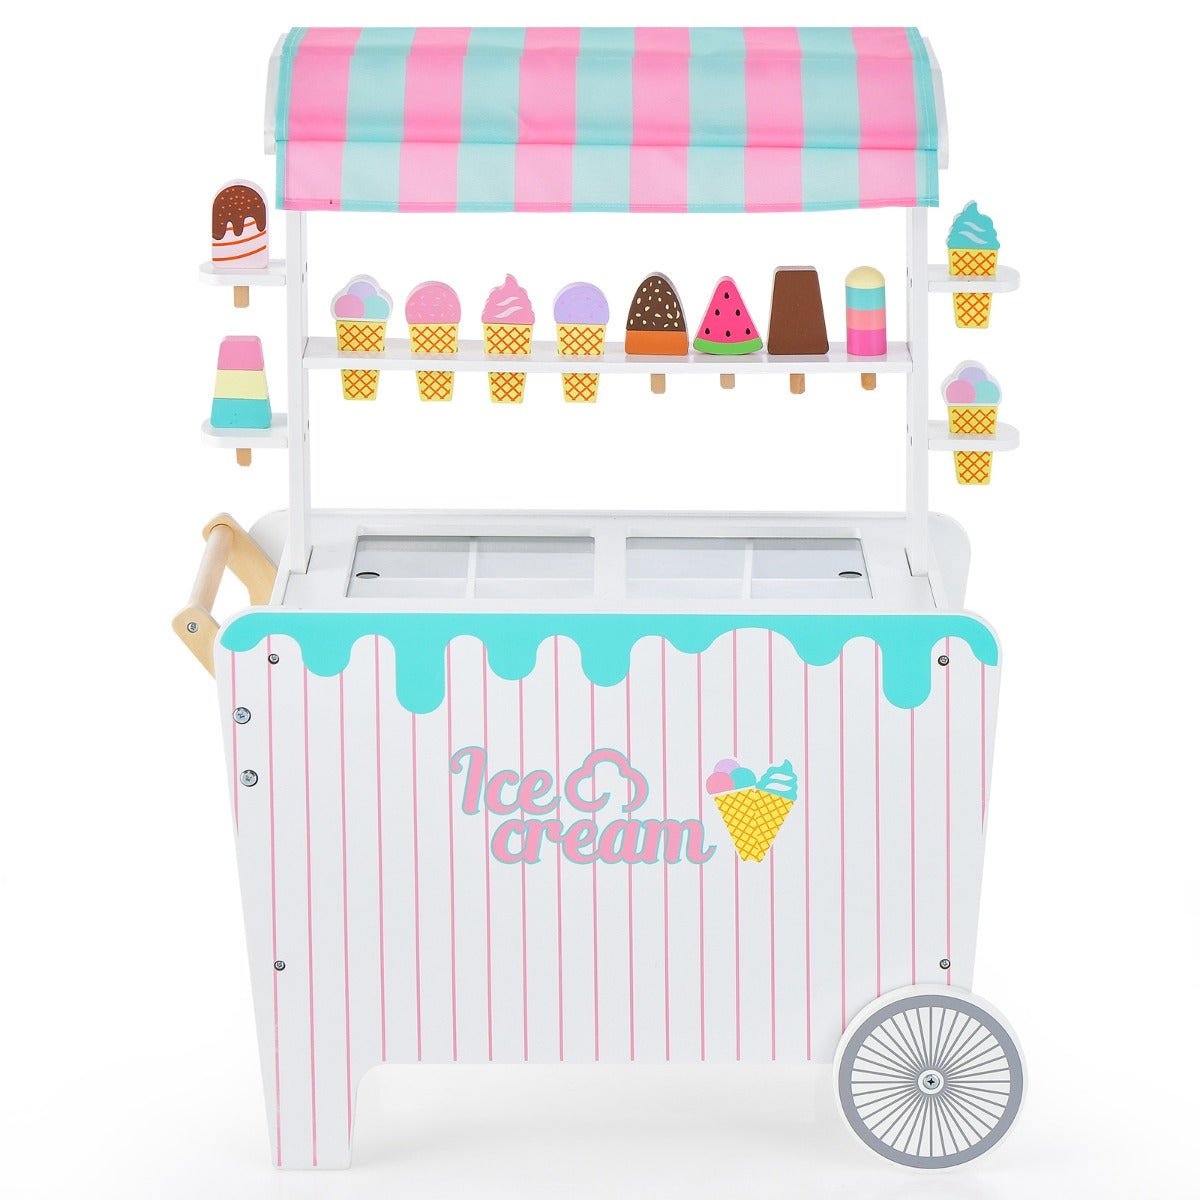 Ice Cream and Food Trunk Toy with 2 Large Wheels for Kids